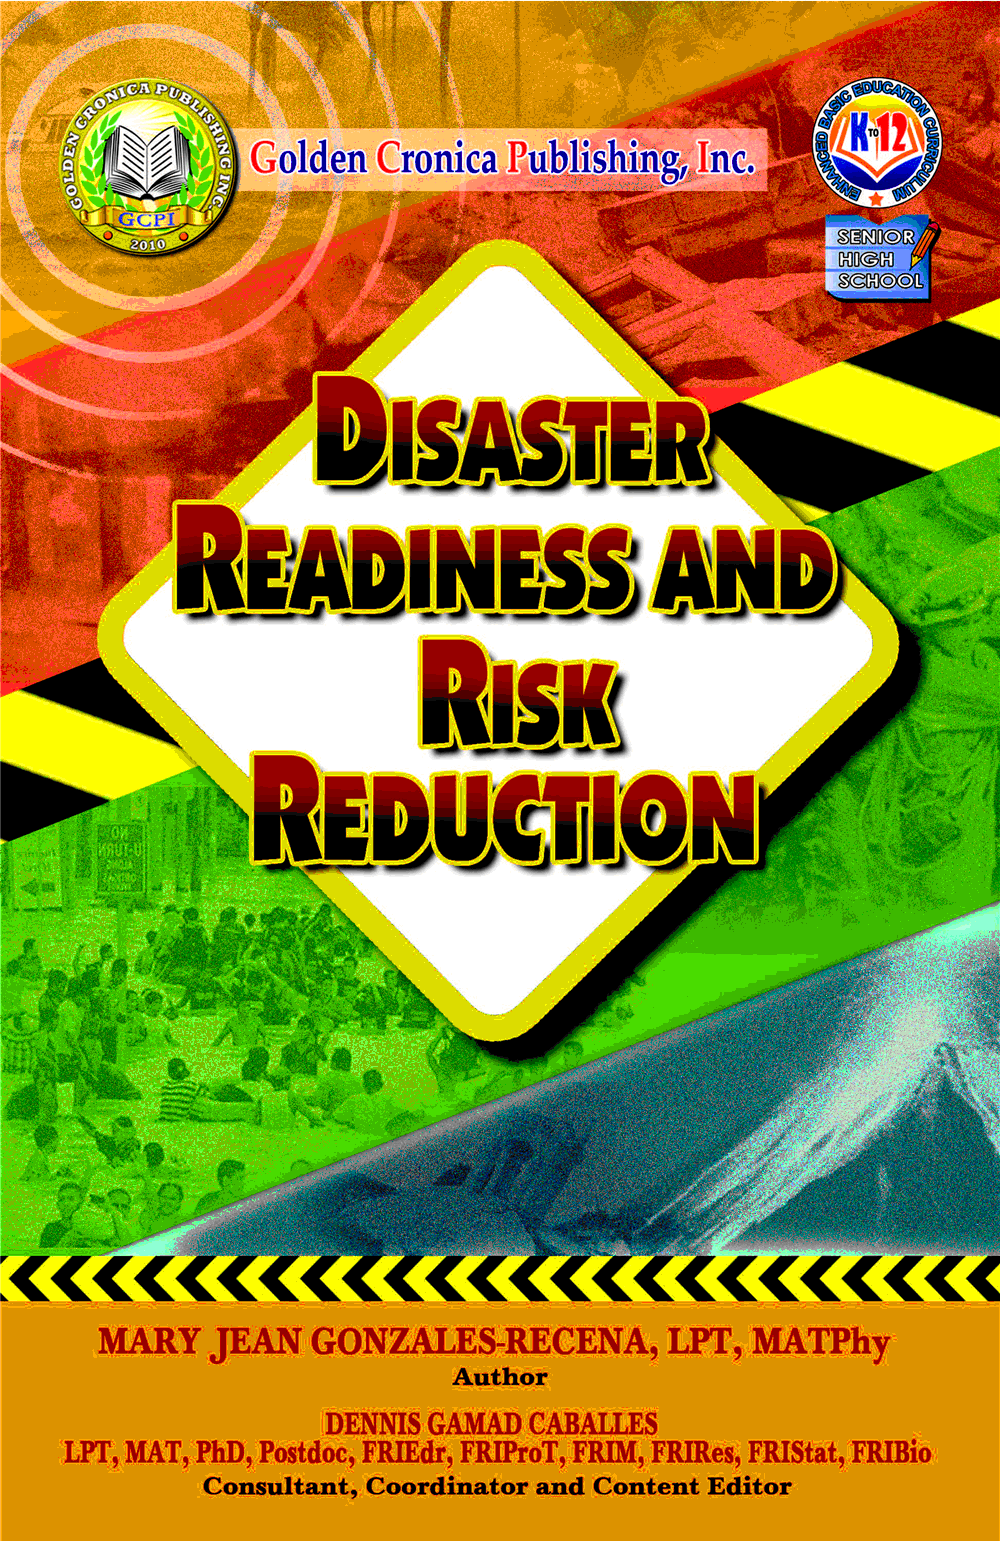 [SHS-DIS] Disaster Readiness and Risk Reduction